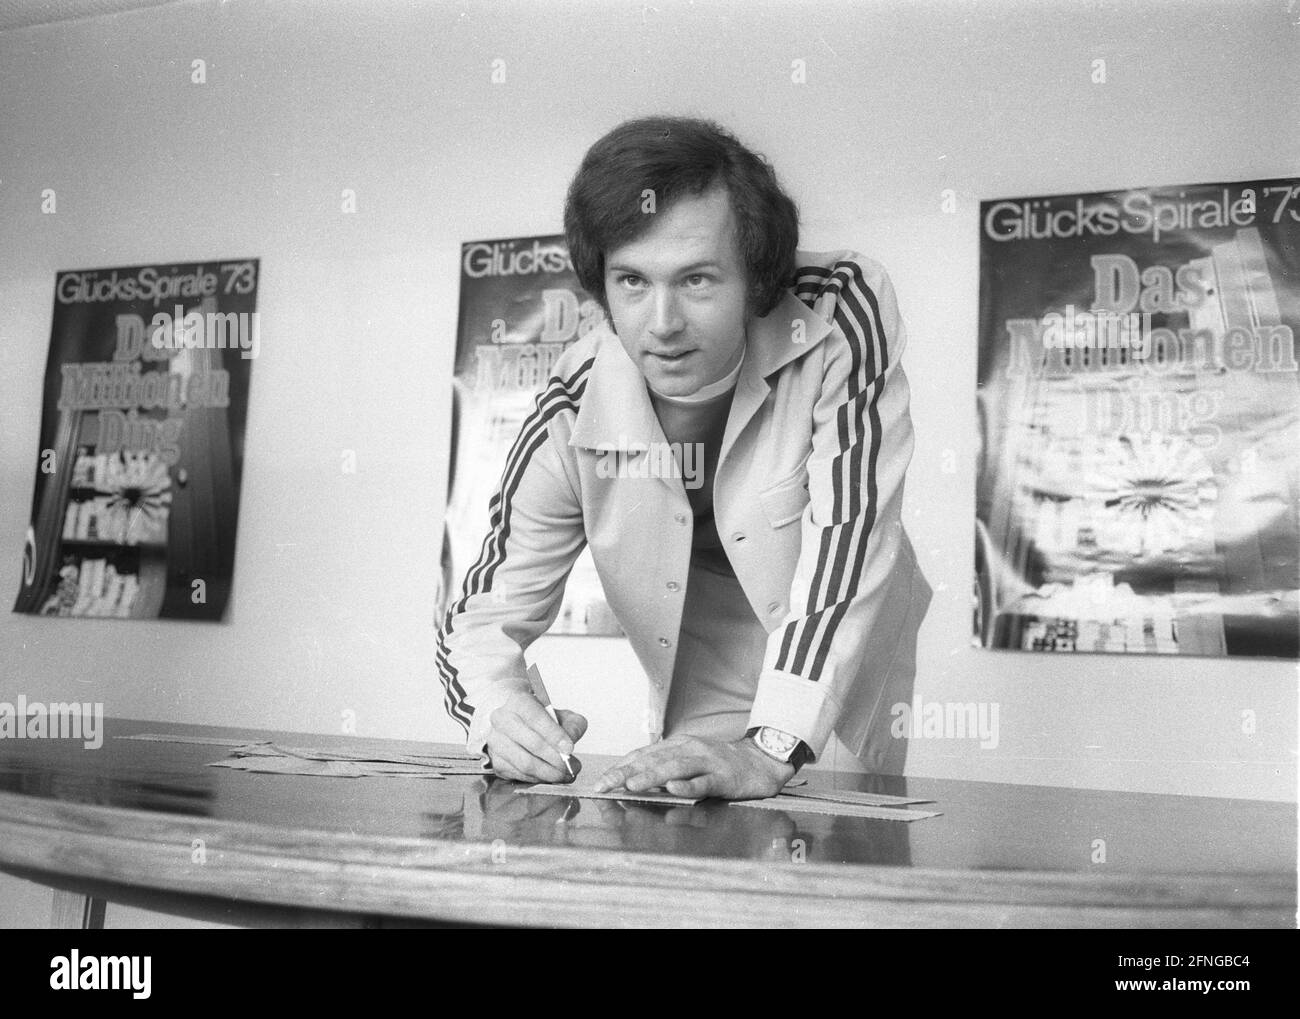 Franz Beckenbauer at a press conference of the Glücksspirale 26.03.1973. [automated translation] Stock Photo